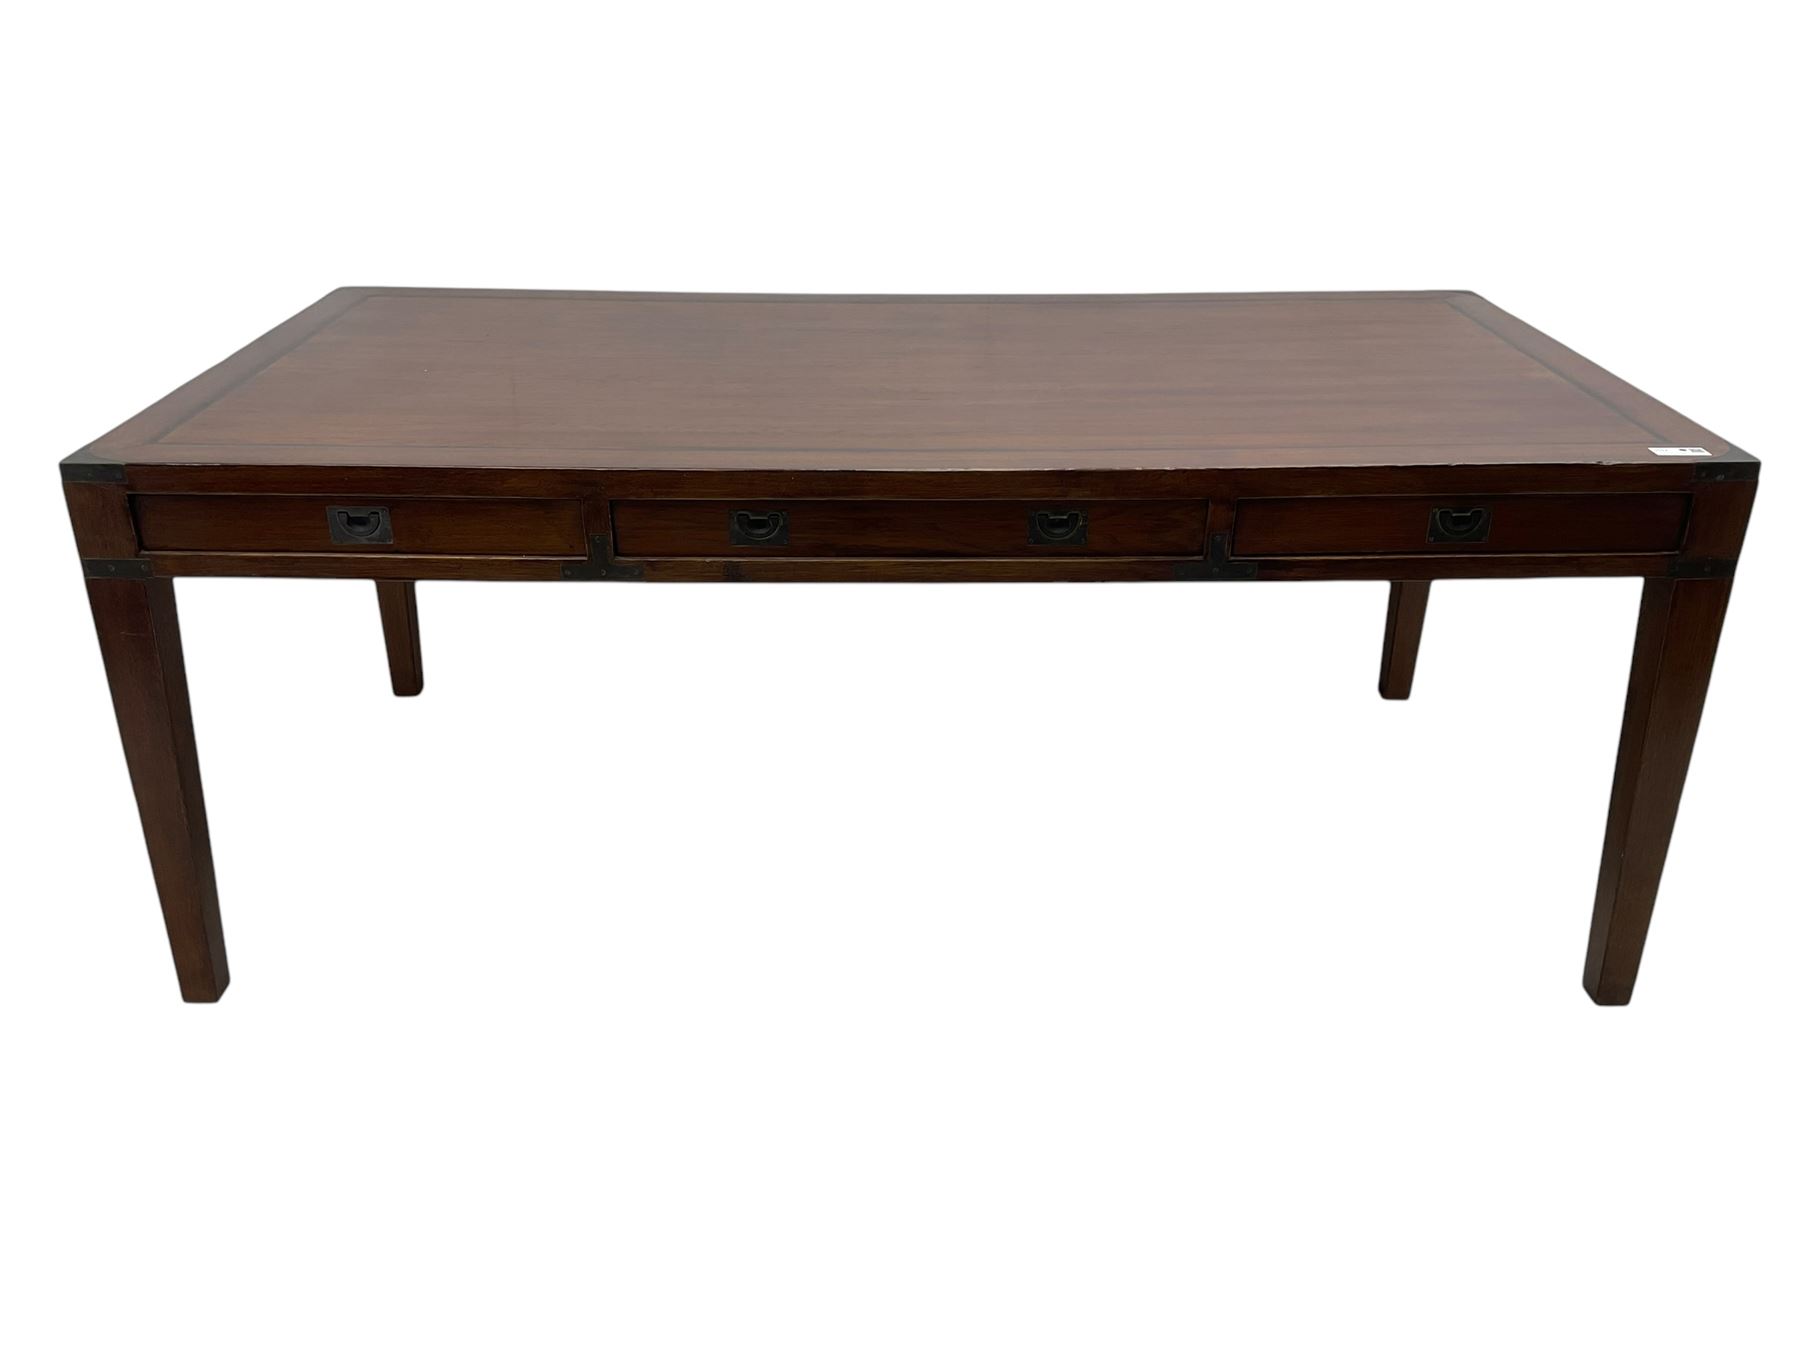 20th century military campaign design oak office or dining table - Image 5 of 5